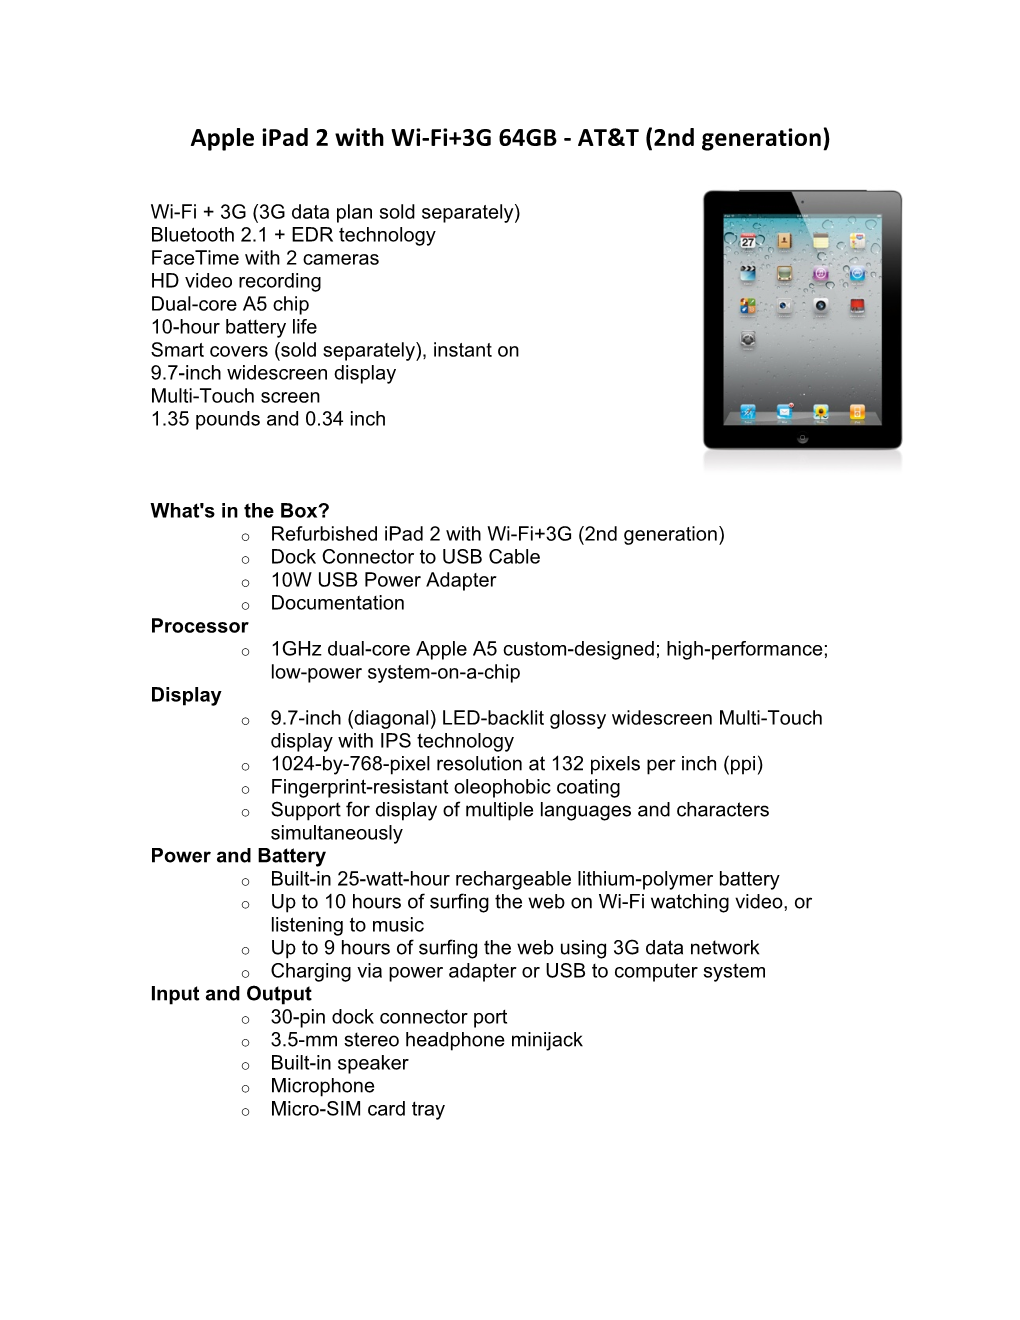 Apple Ipad 2 with Wi-‐Fi+3G 64GB -‐ AT&T (2Nd Generation)